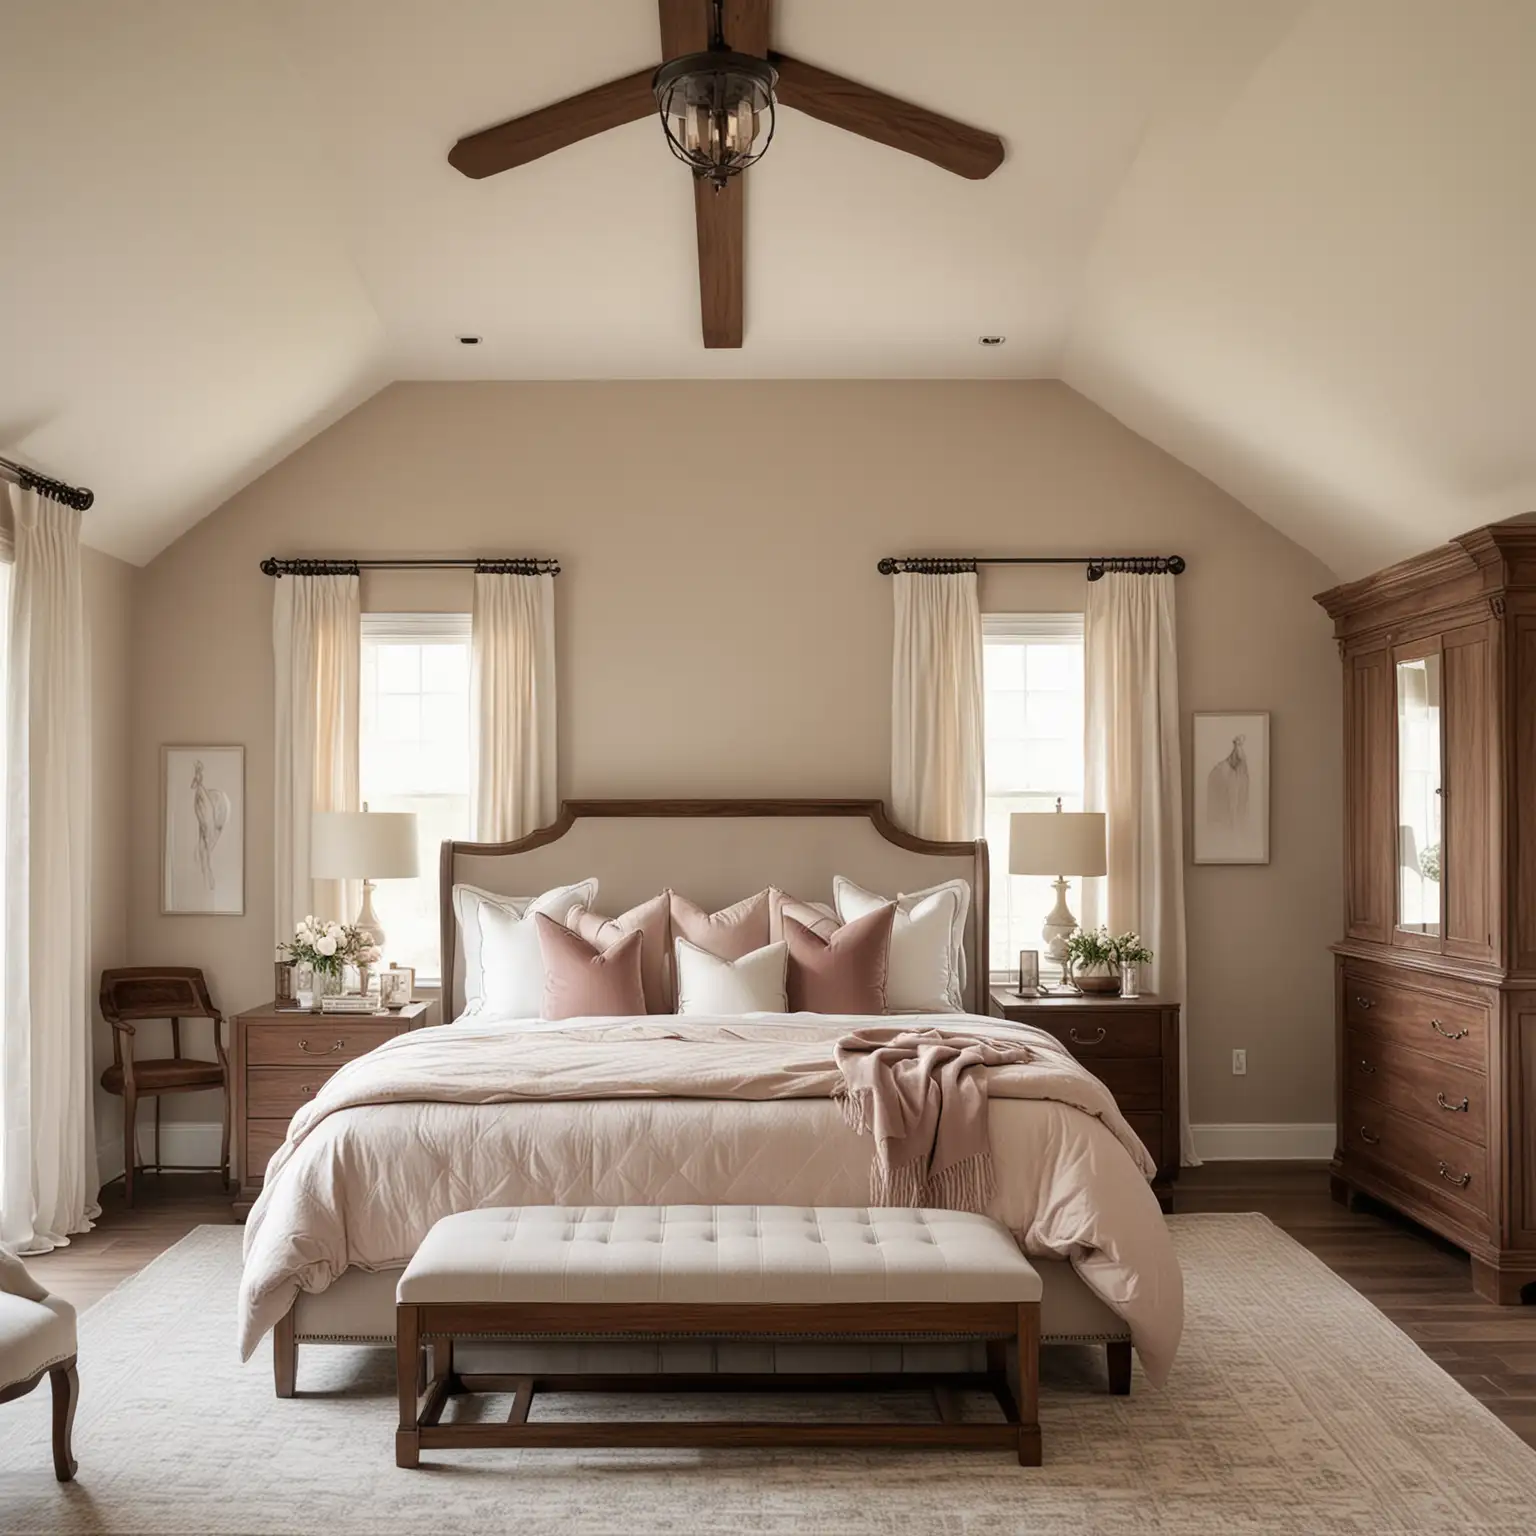 Luxurious French Farmhouse Master Bedroom with Equestrian Flair